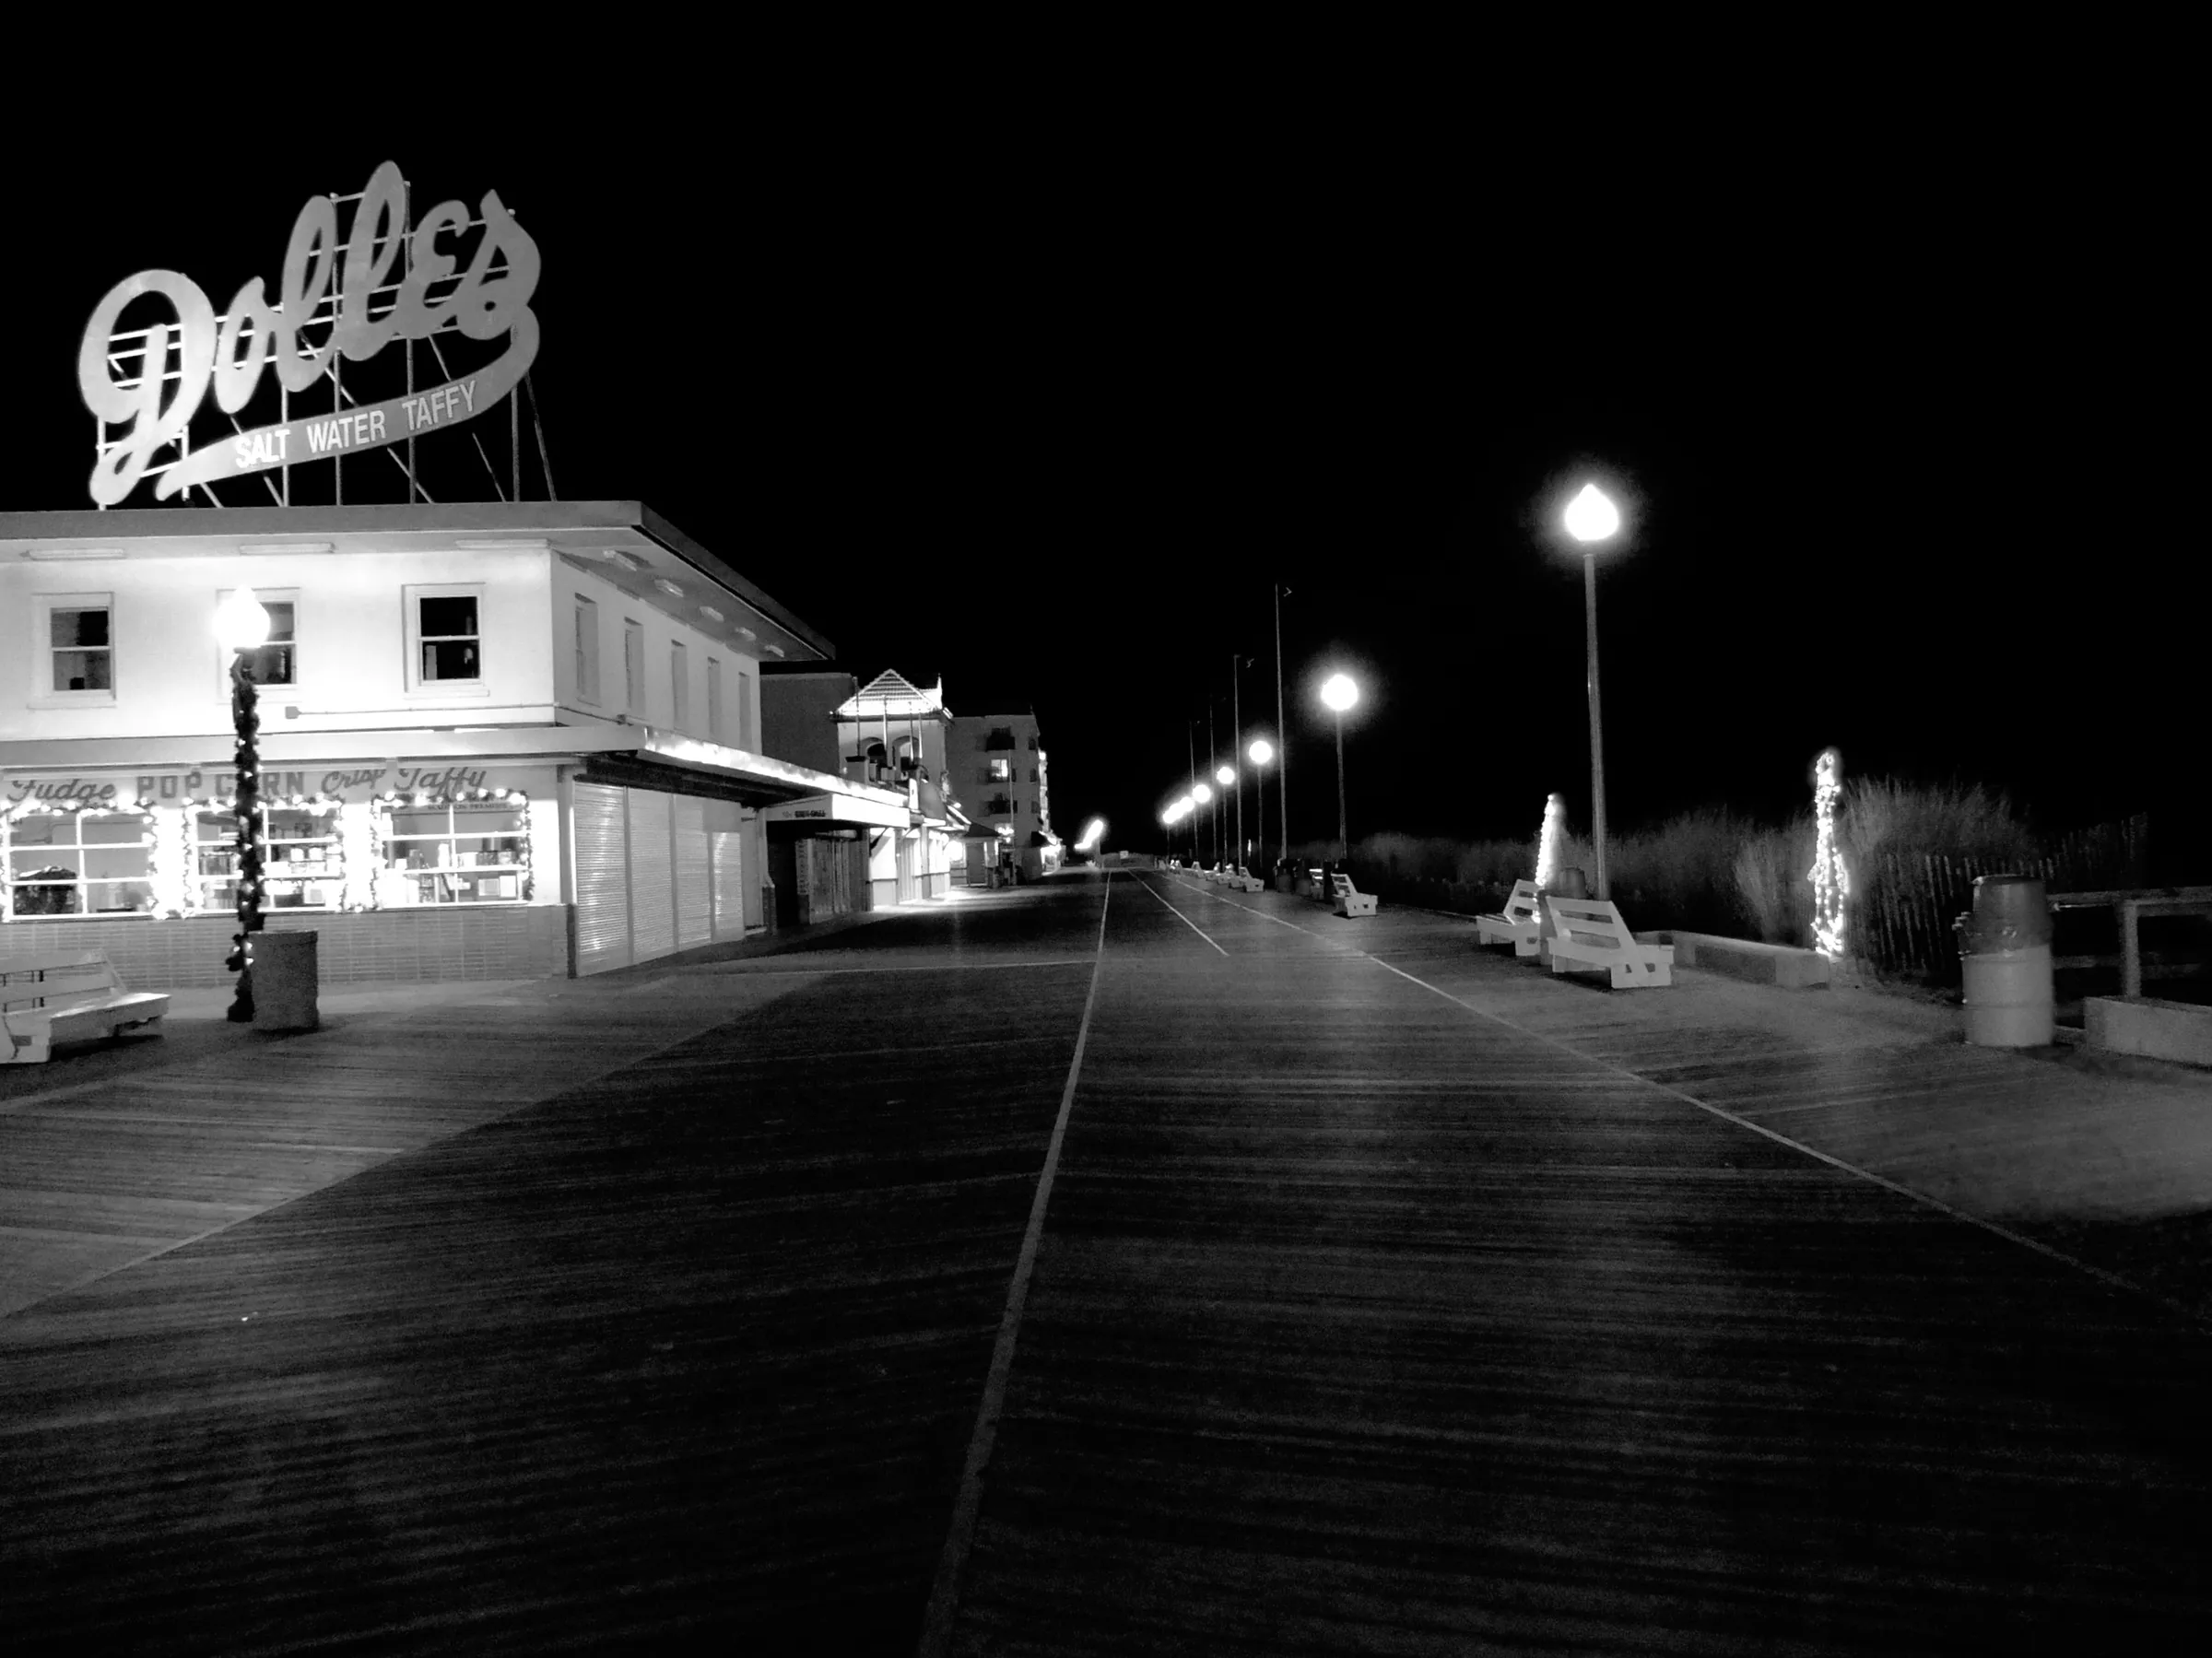 An empty boardwalk at night, street lamps along the beach edge, a large sign above a two-story building sign reads 'Dolles.'